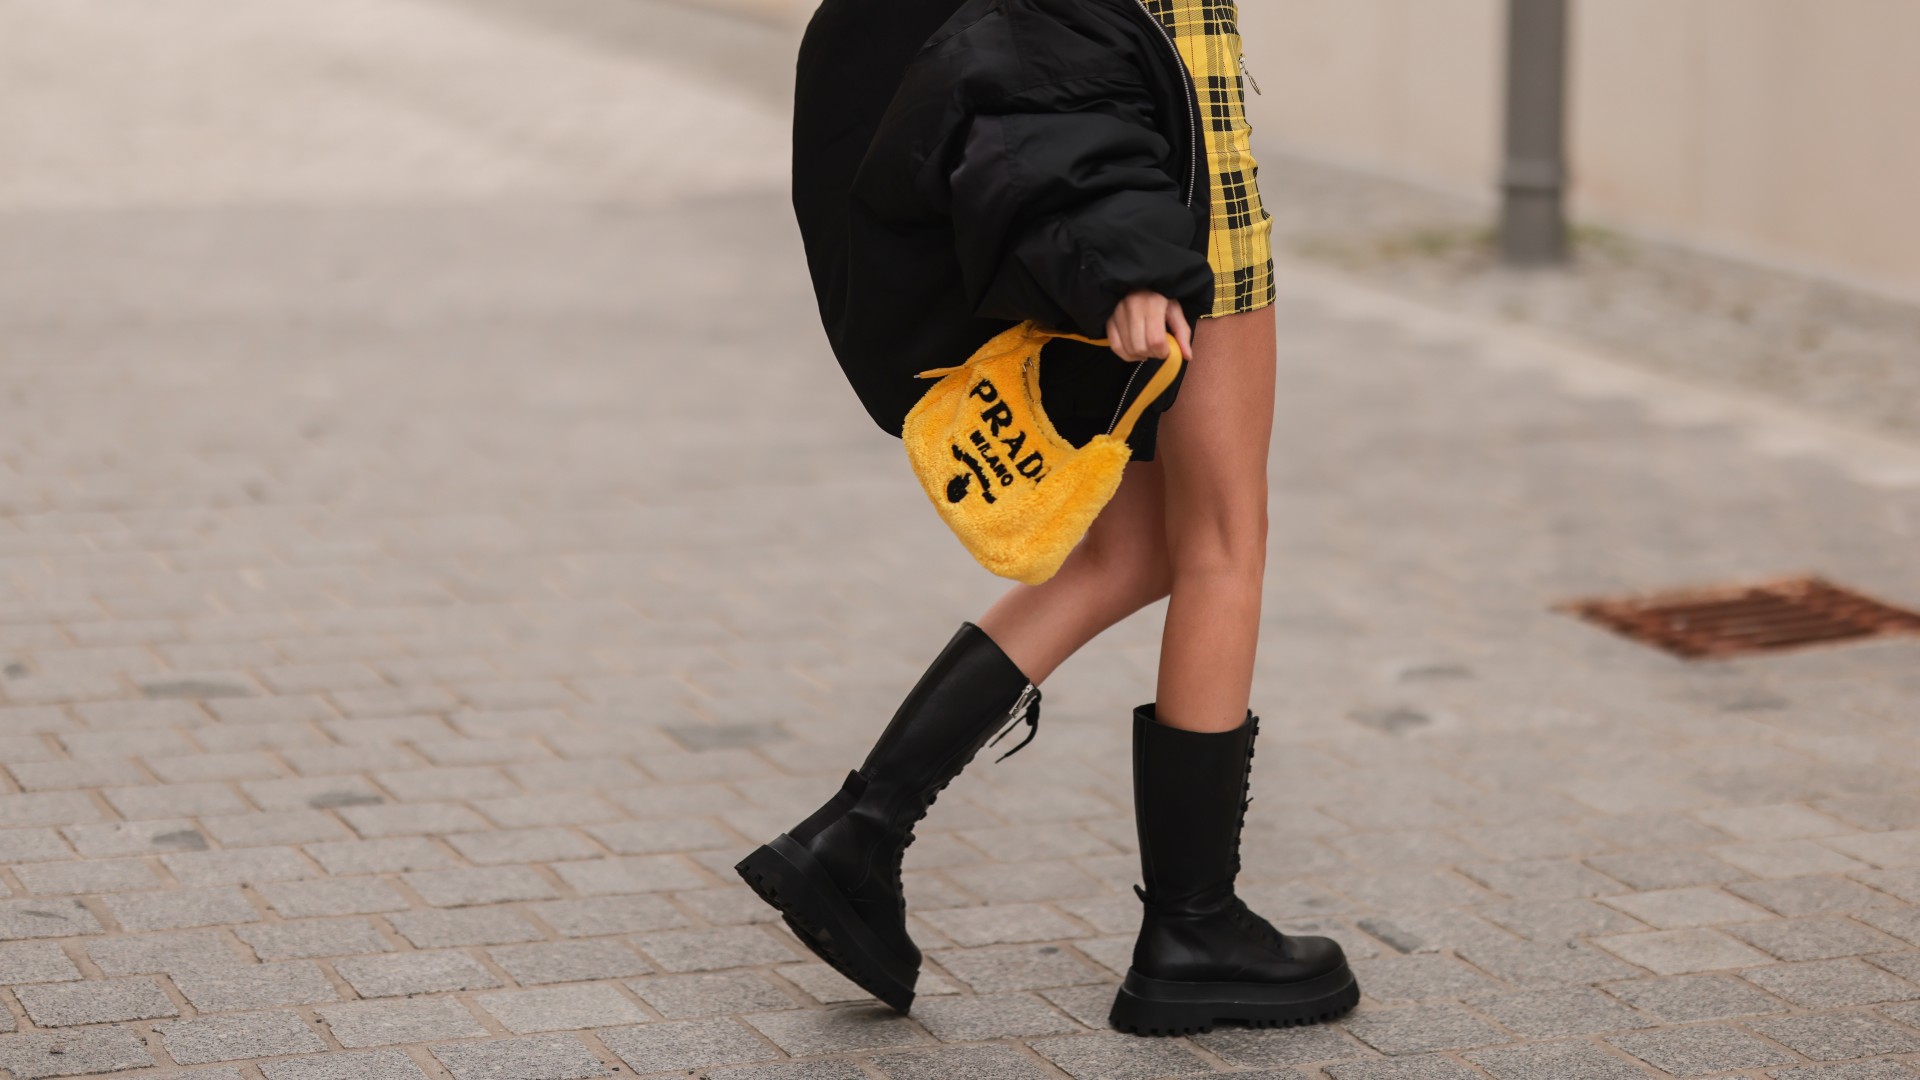 Best Combat Boots for Women 2023: Stylish Lace-up Boots to Shop Now